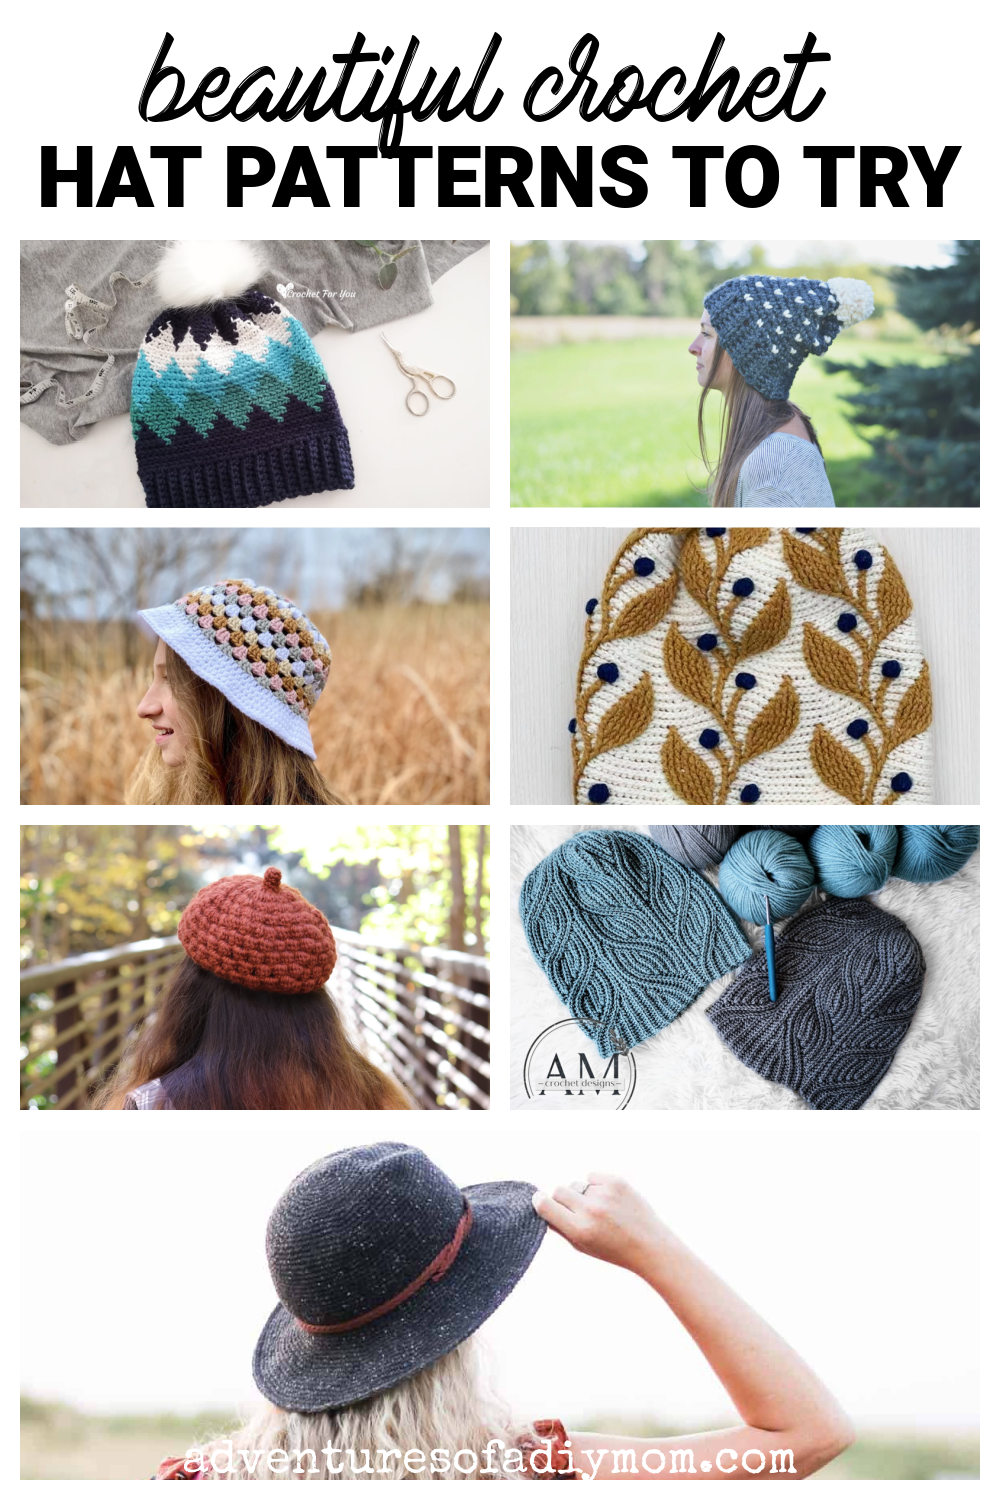 cozy hat crochet pattern Archives - Evelyn And Peter Crochet